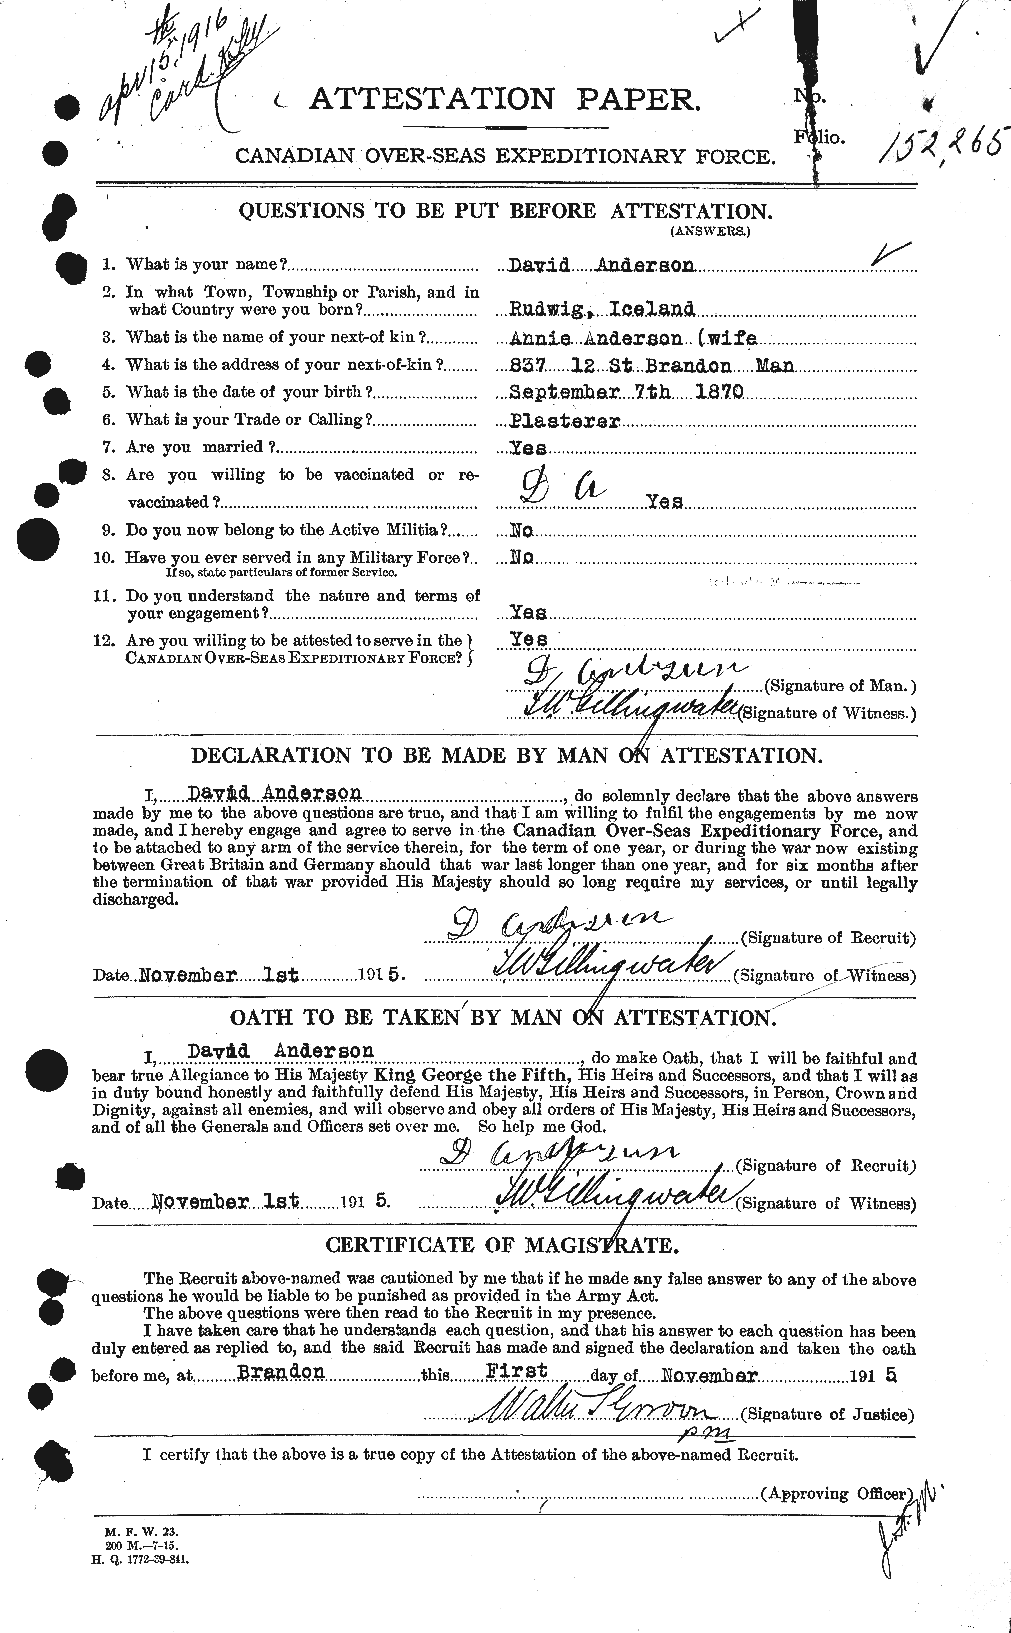 Personnel Records of the First World War - CEF 210023a